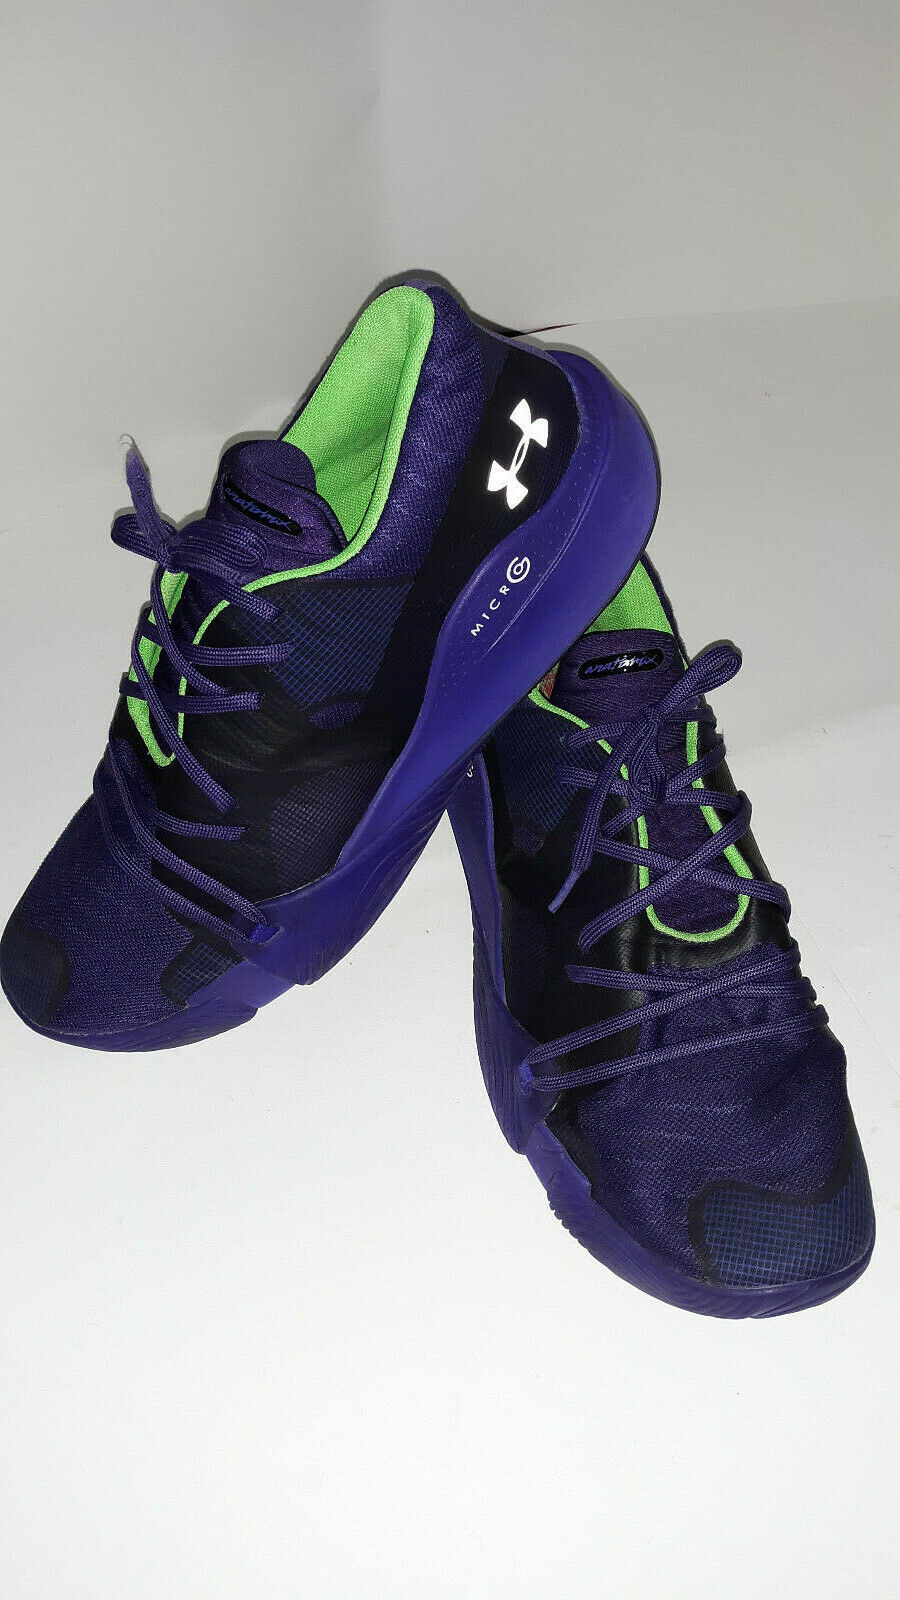 Under Armour Anatomix Spawn Men's Sz 15 Micro G Basketball Shoes